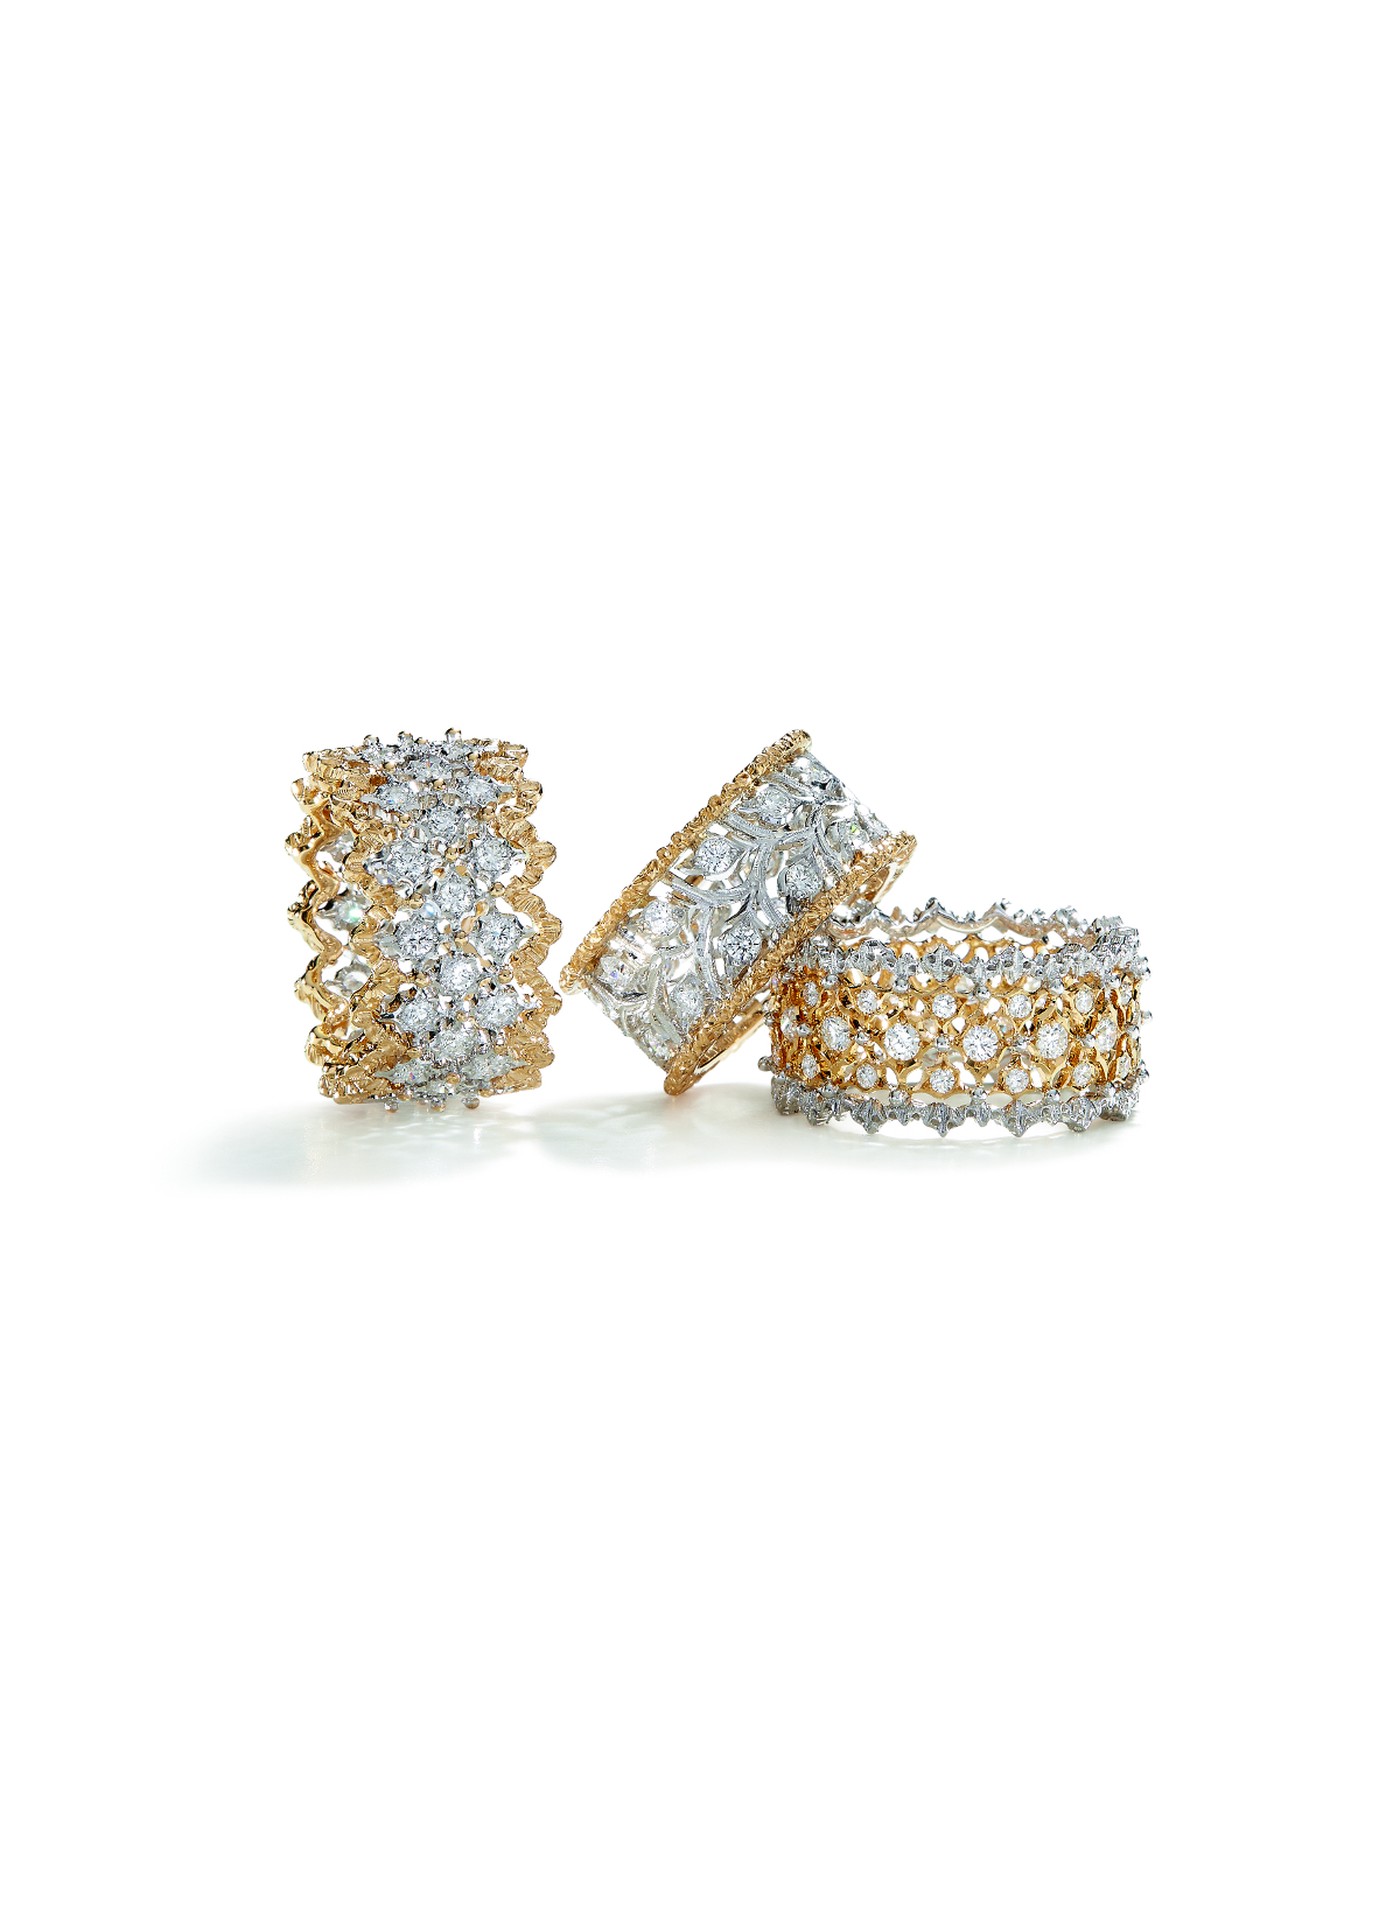 Rombi Eternelle rings in white and yellow gold set with diamonds, with scalloped gold borders